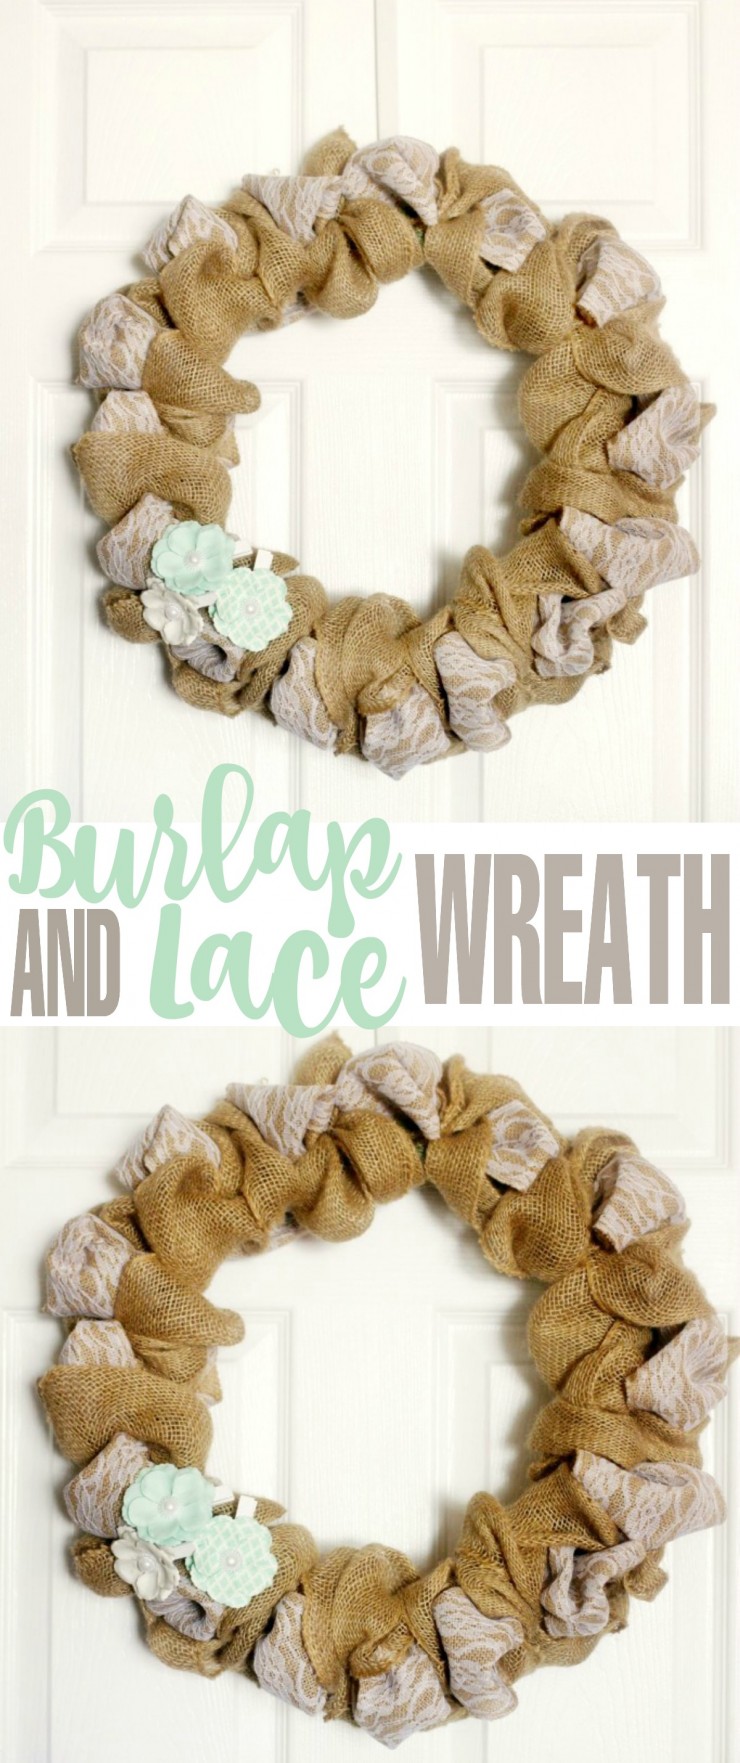 This Burlap & Lace Wreath is a super easy DIY project and is the perfect addition to shabby chic decor.